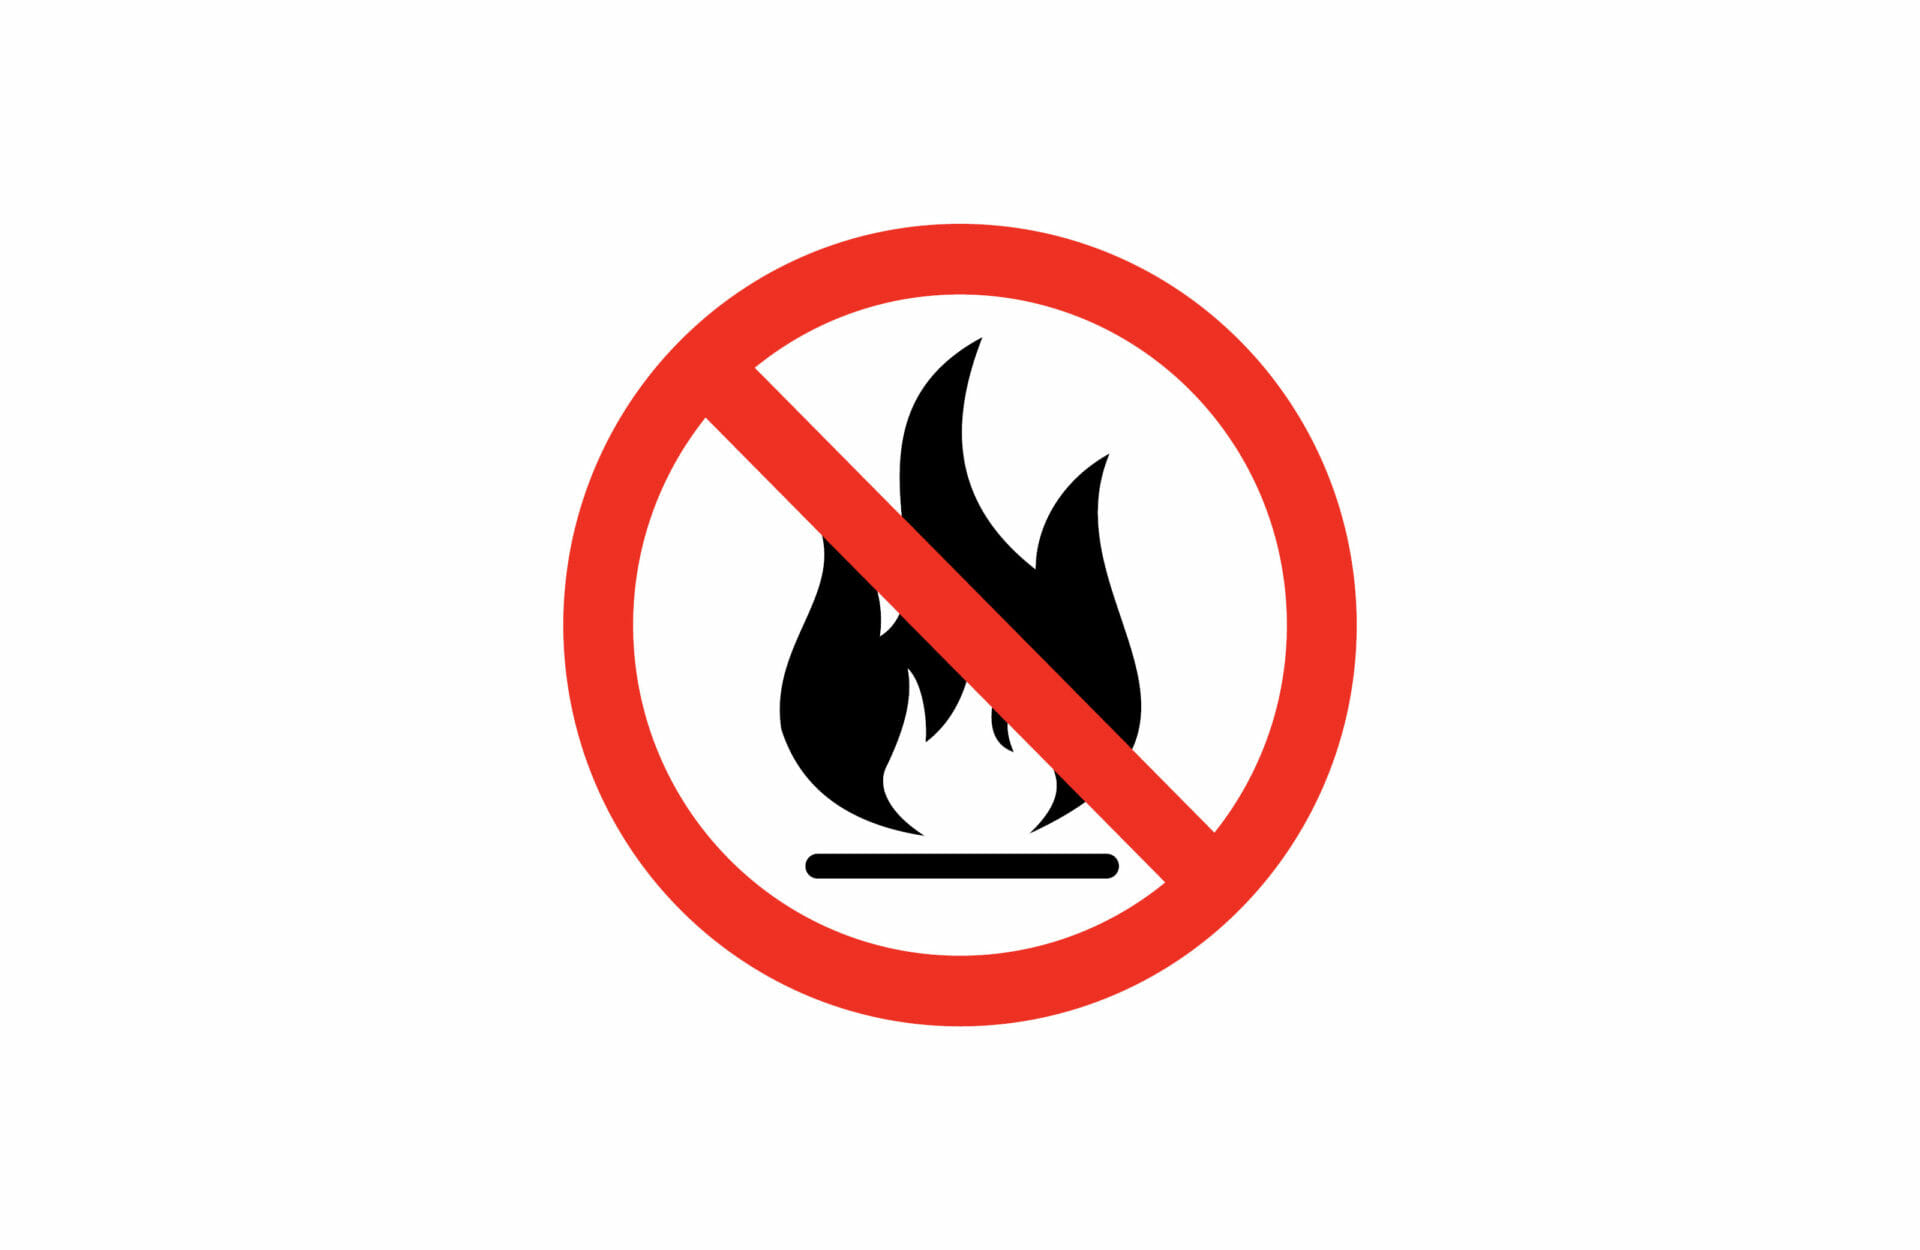 Campfire ban in effect